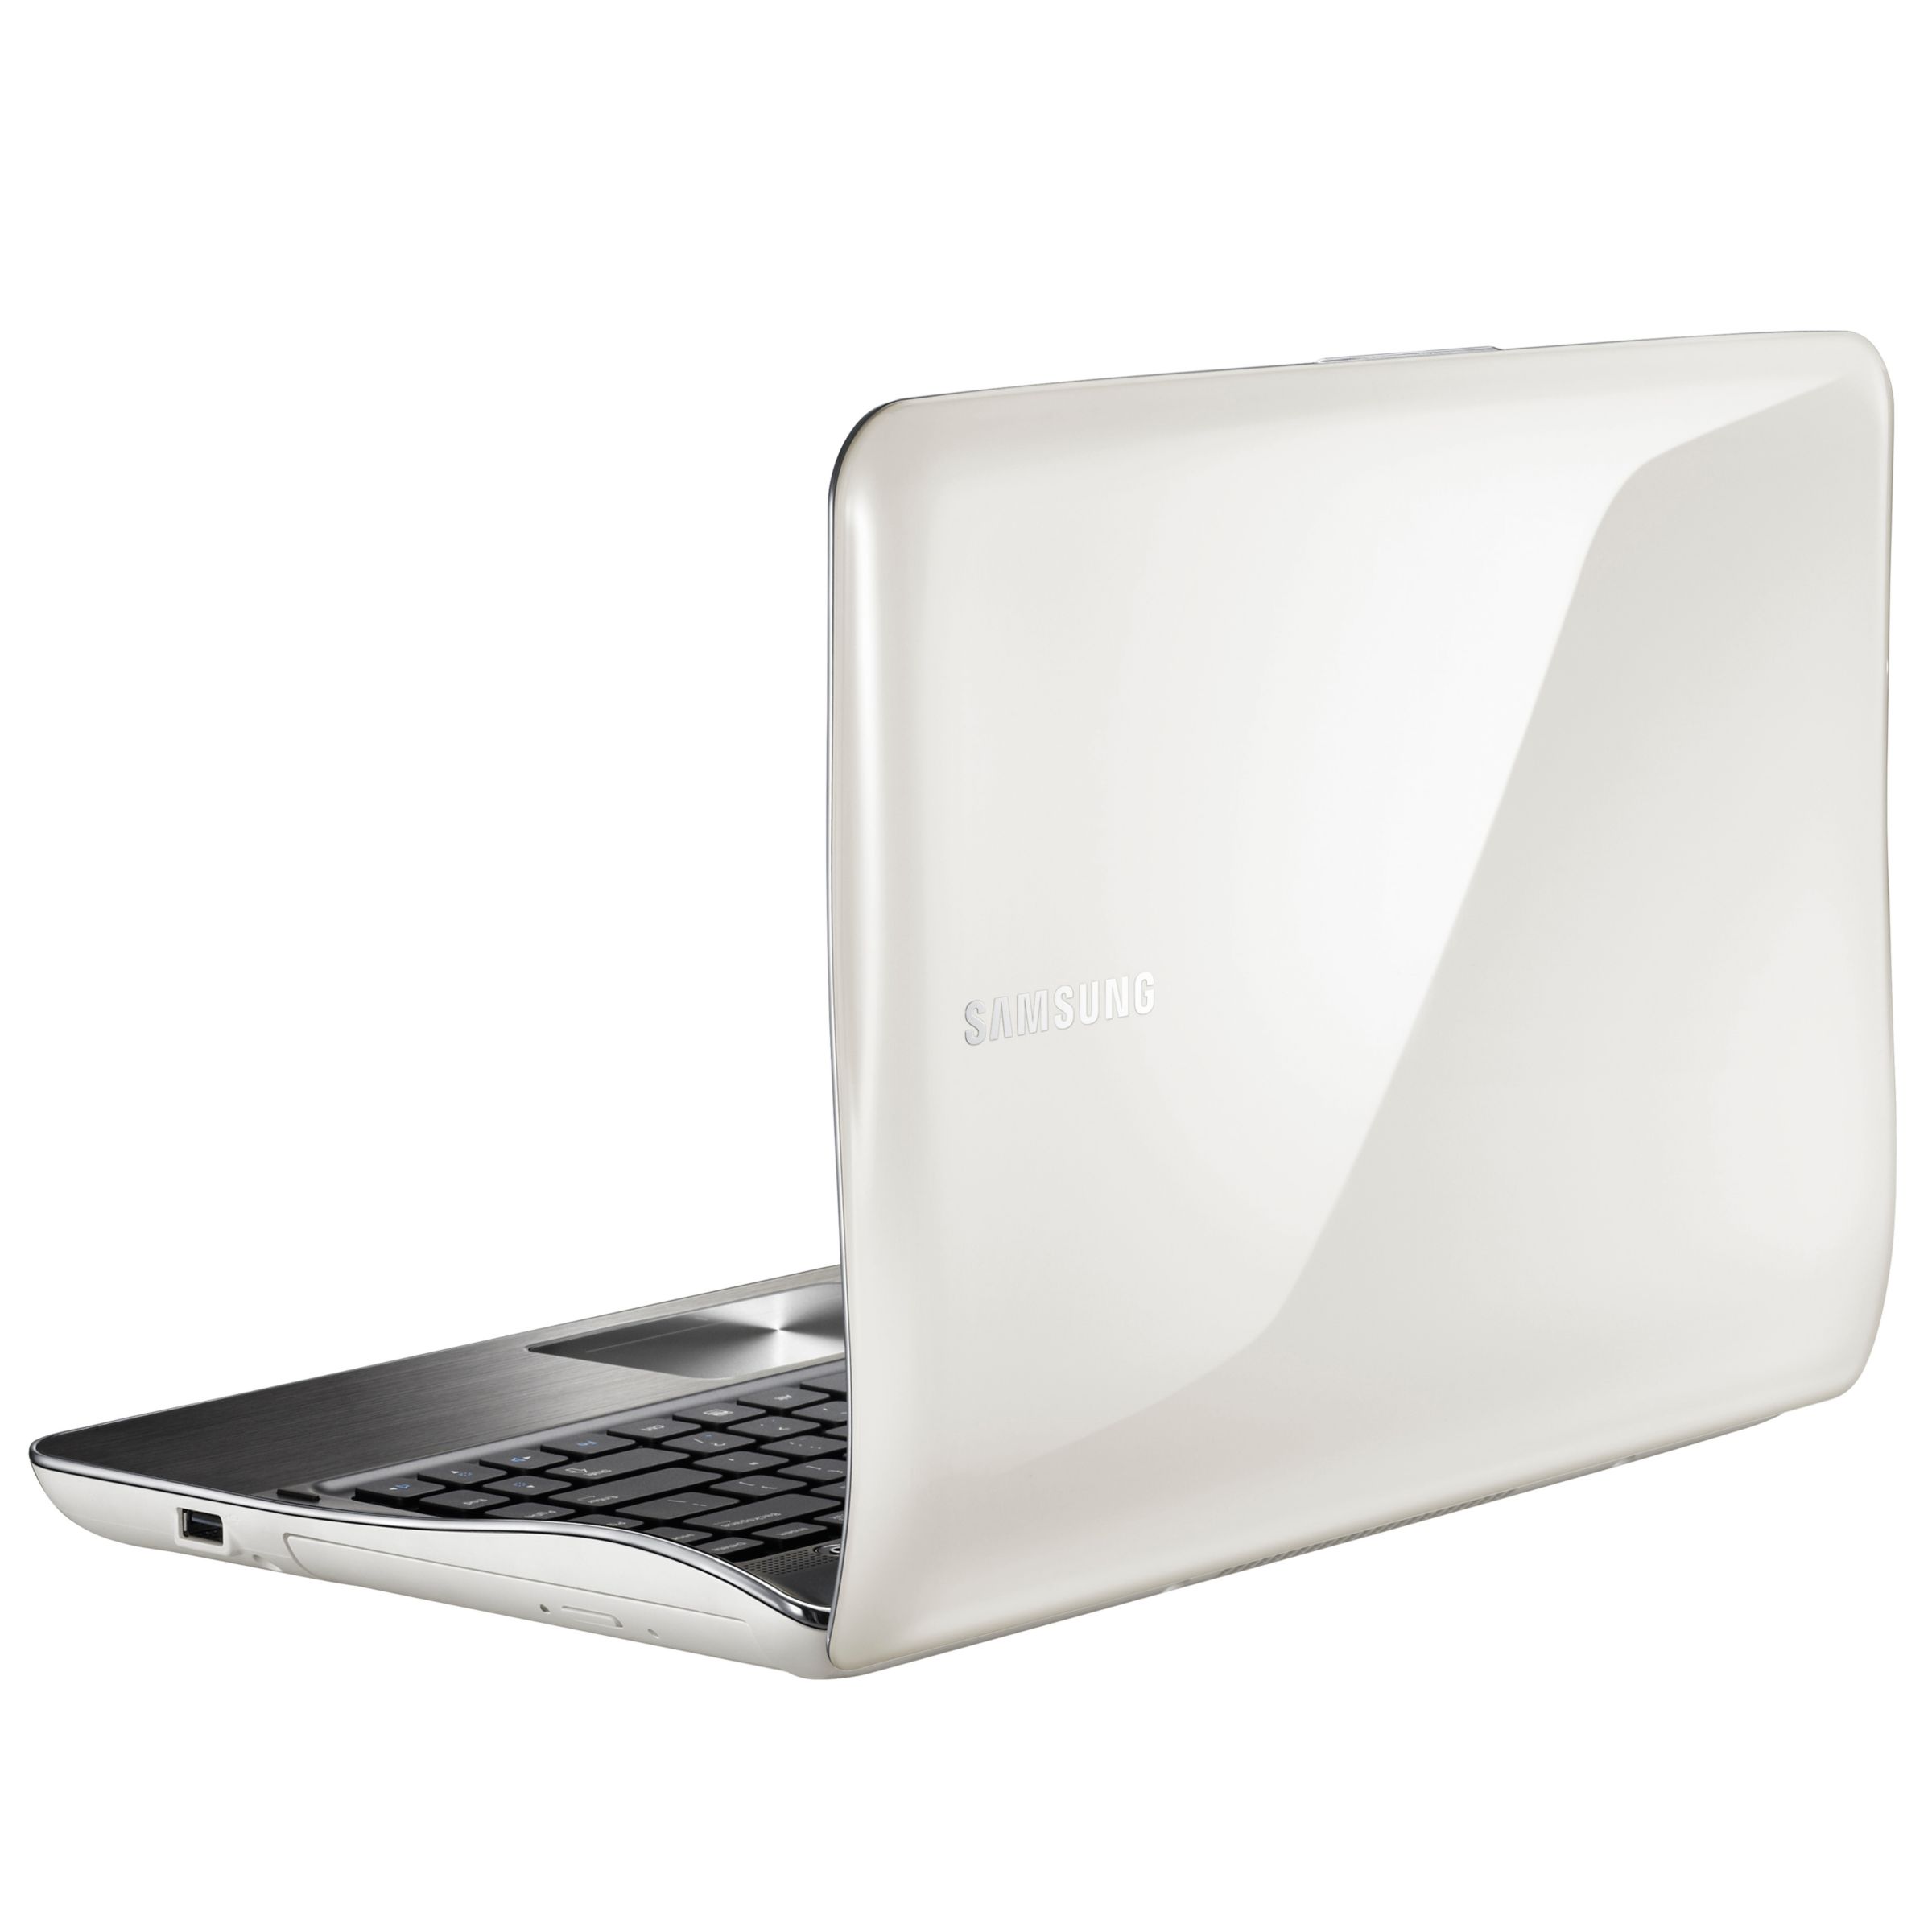 Samsung SF310 Laptop, Intel Core i5, 320GB, 4GB with 13.3 Inch Display, Ivory at John Lewis